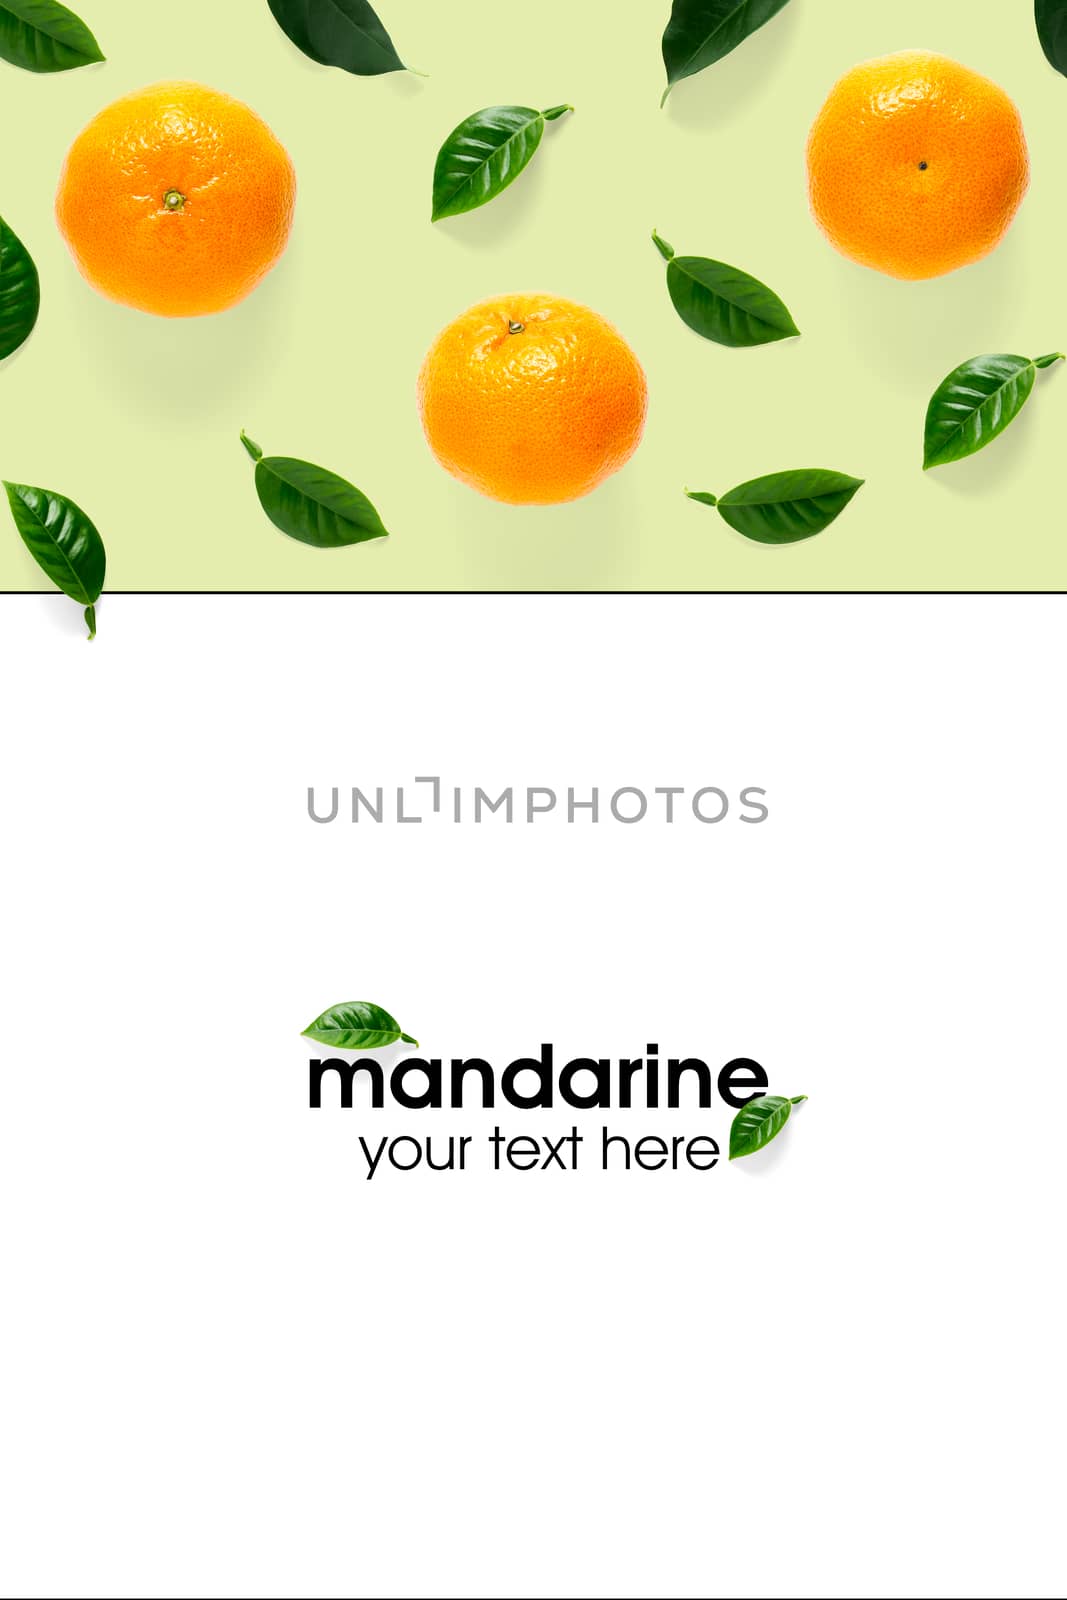 Creative layout of tangerines, mandarines. Unpeeled and peeled ripe tangerines, mandarines, clementines with leaves isolated on white background. by PhotoTime